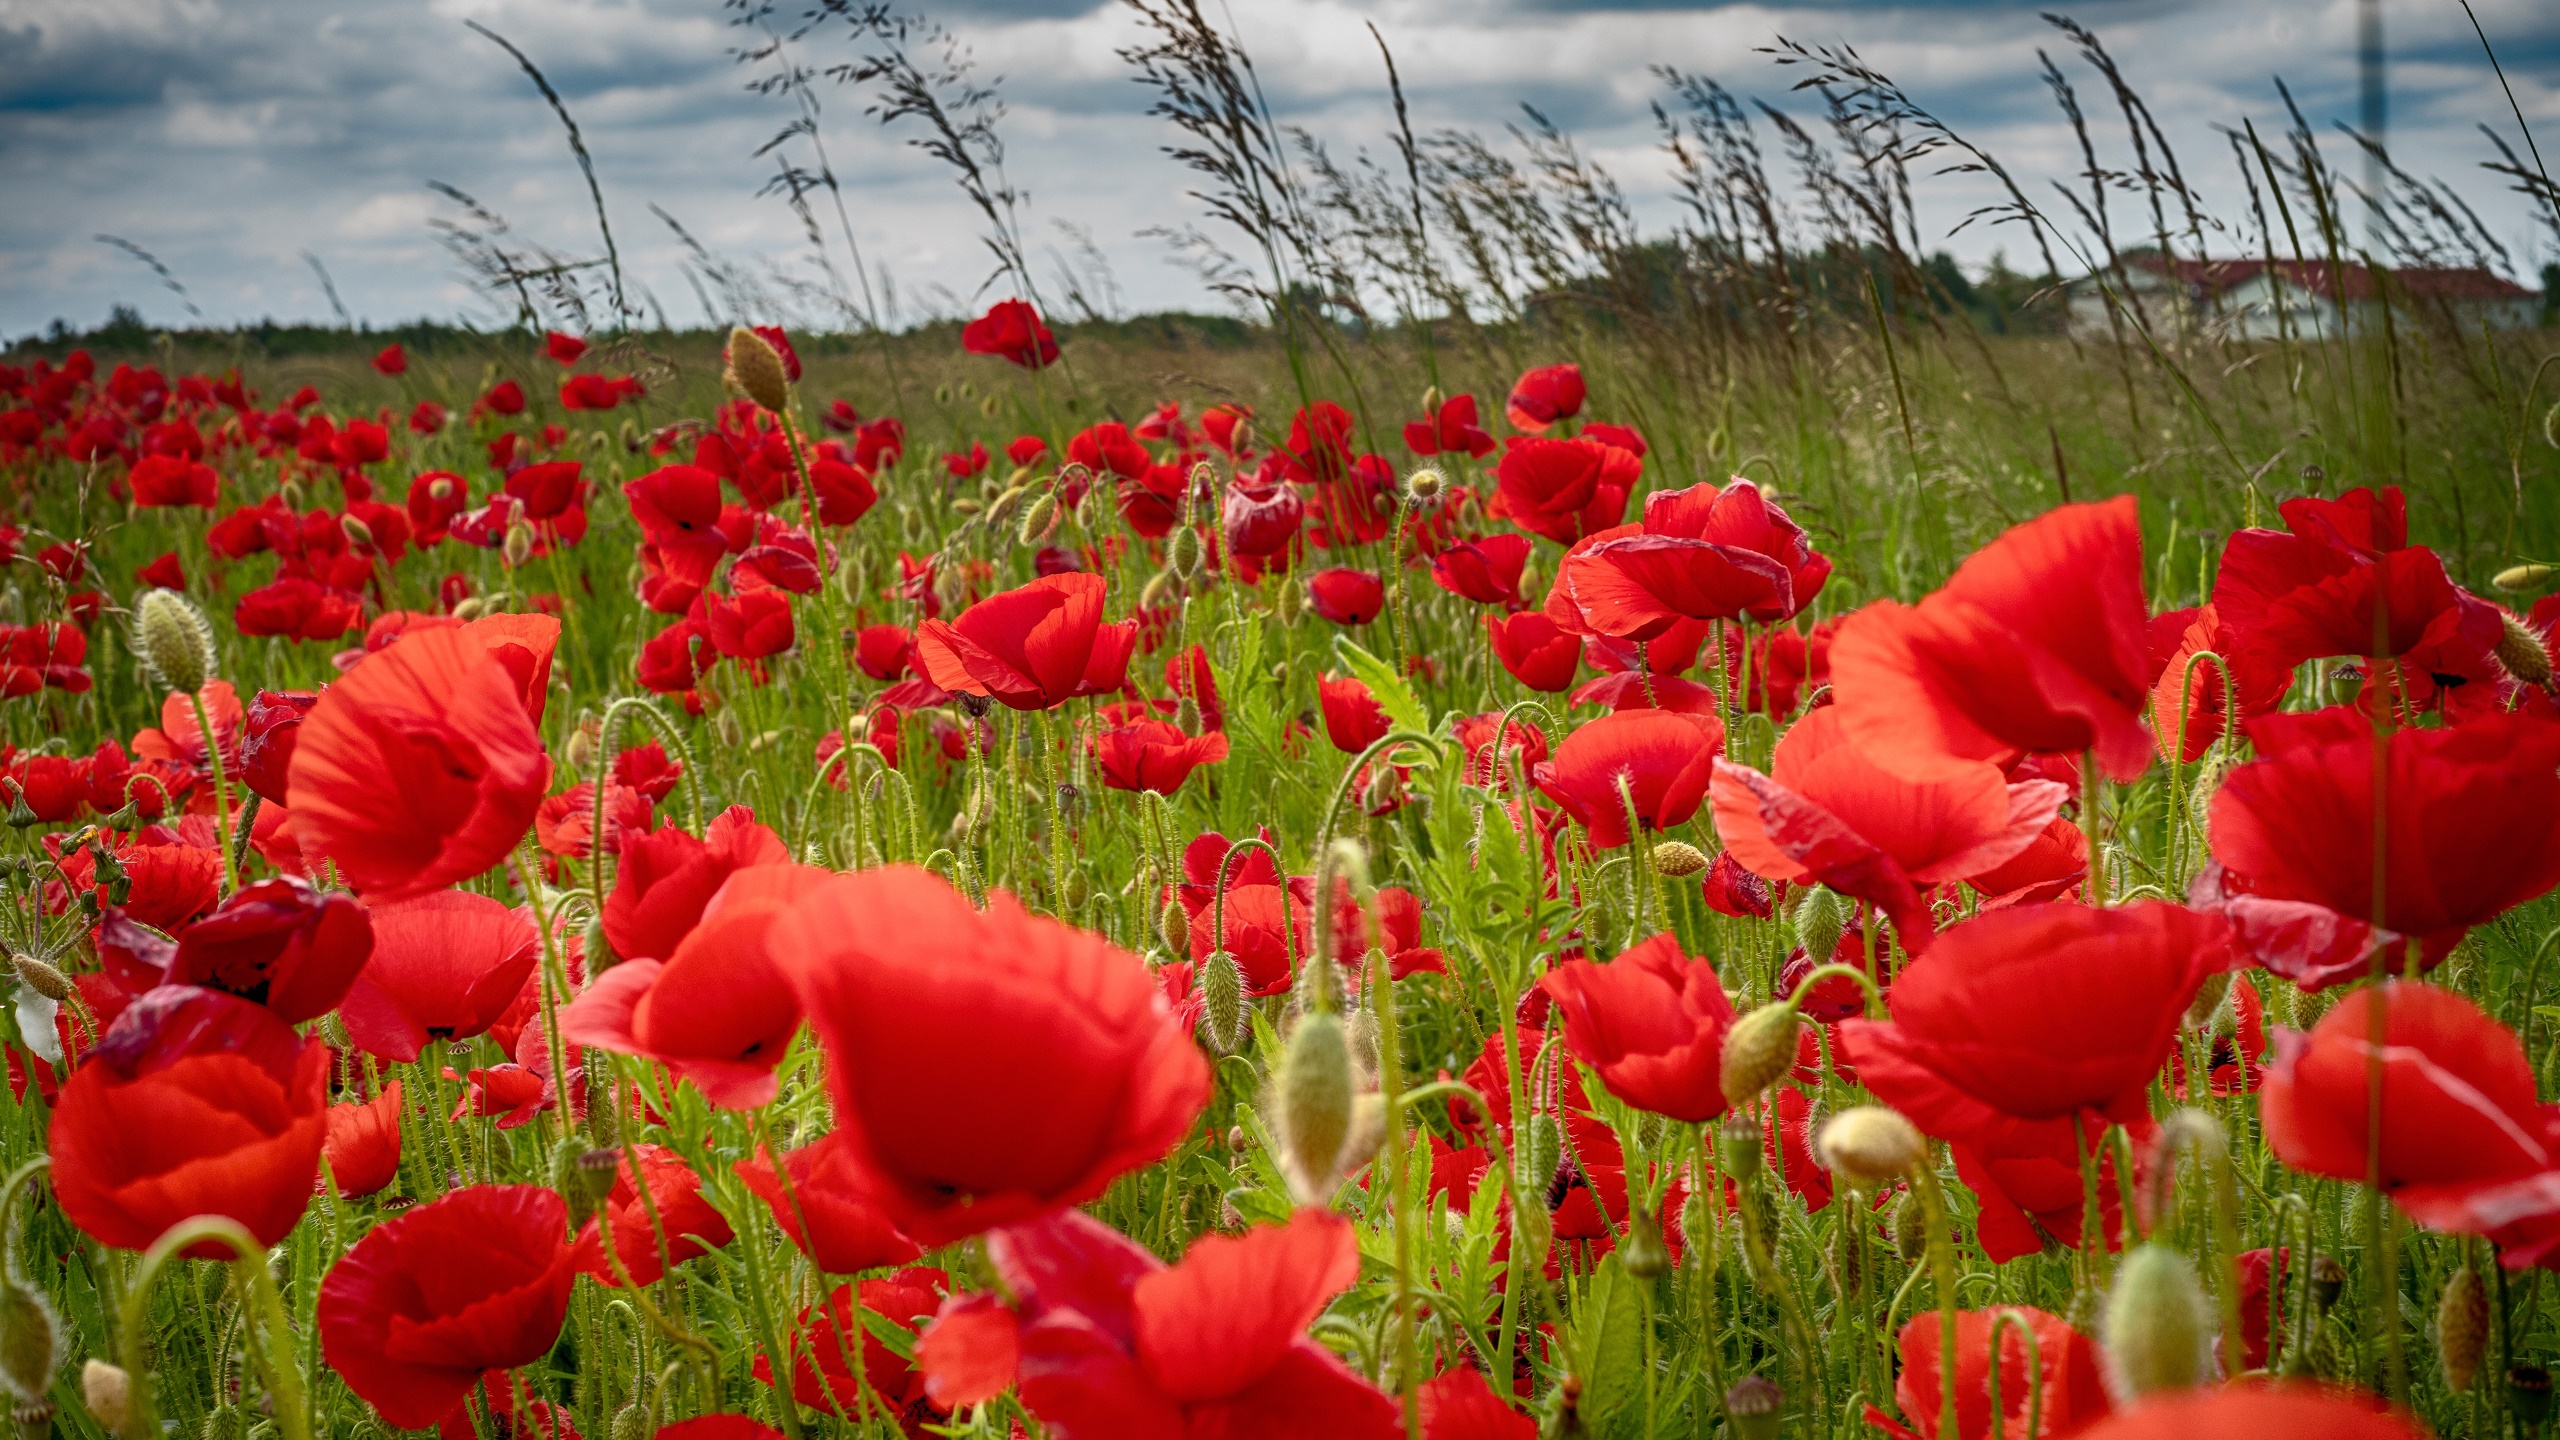 General 2560x1440 colorful field flowers plants red flowers poppies nature